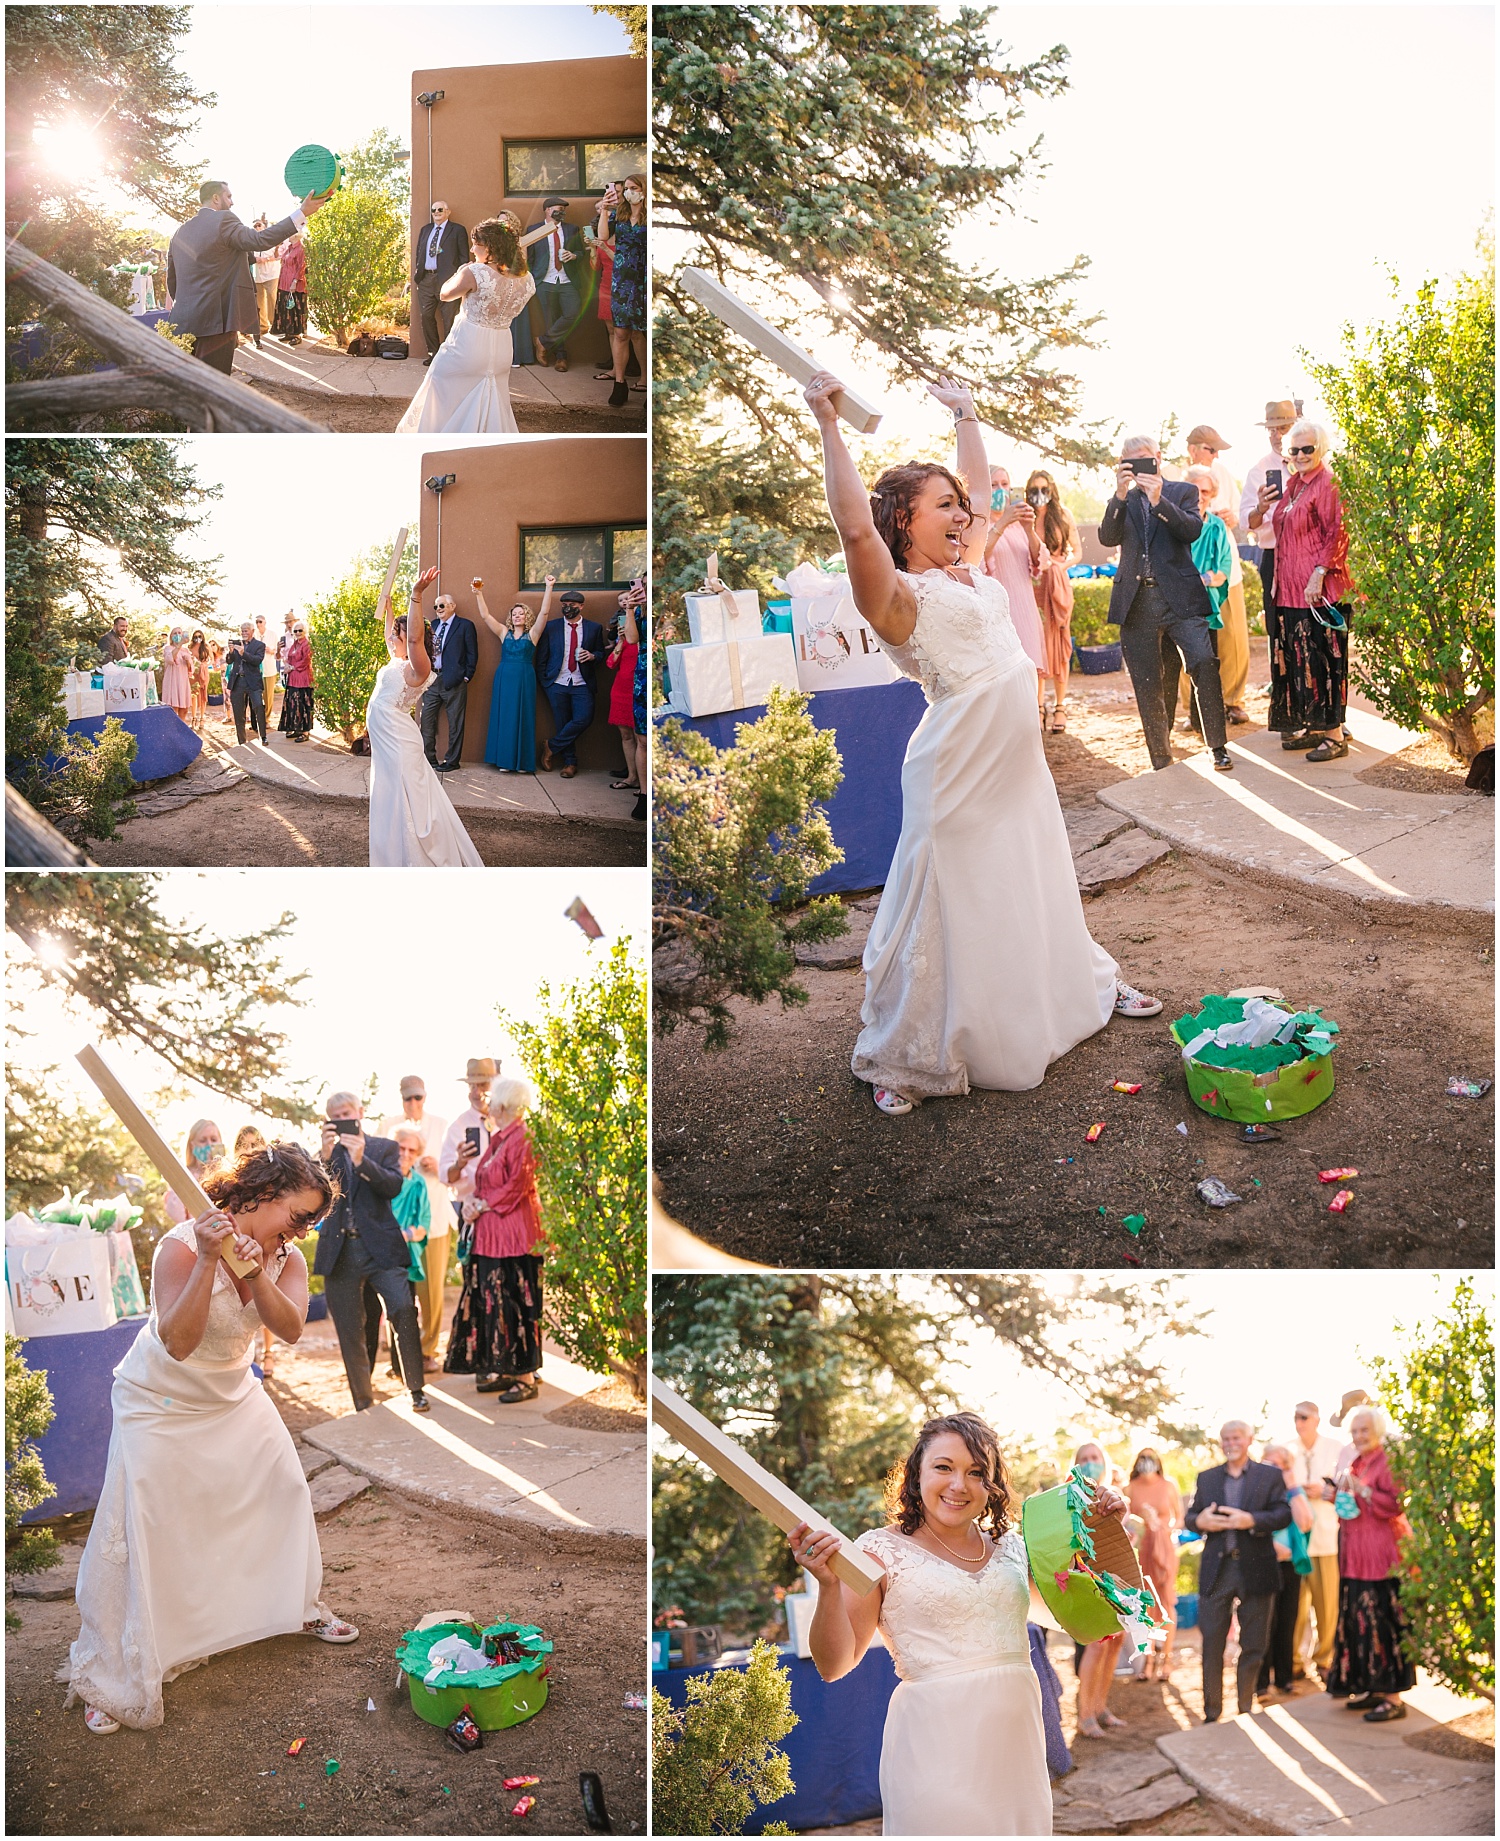 Bride knocks down covid pinata to celebrate wedding day in her parents' backyard